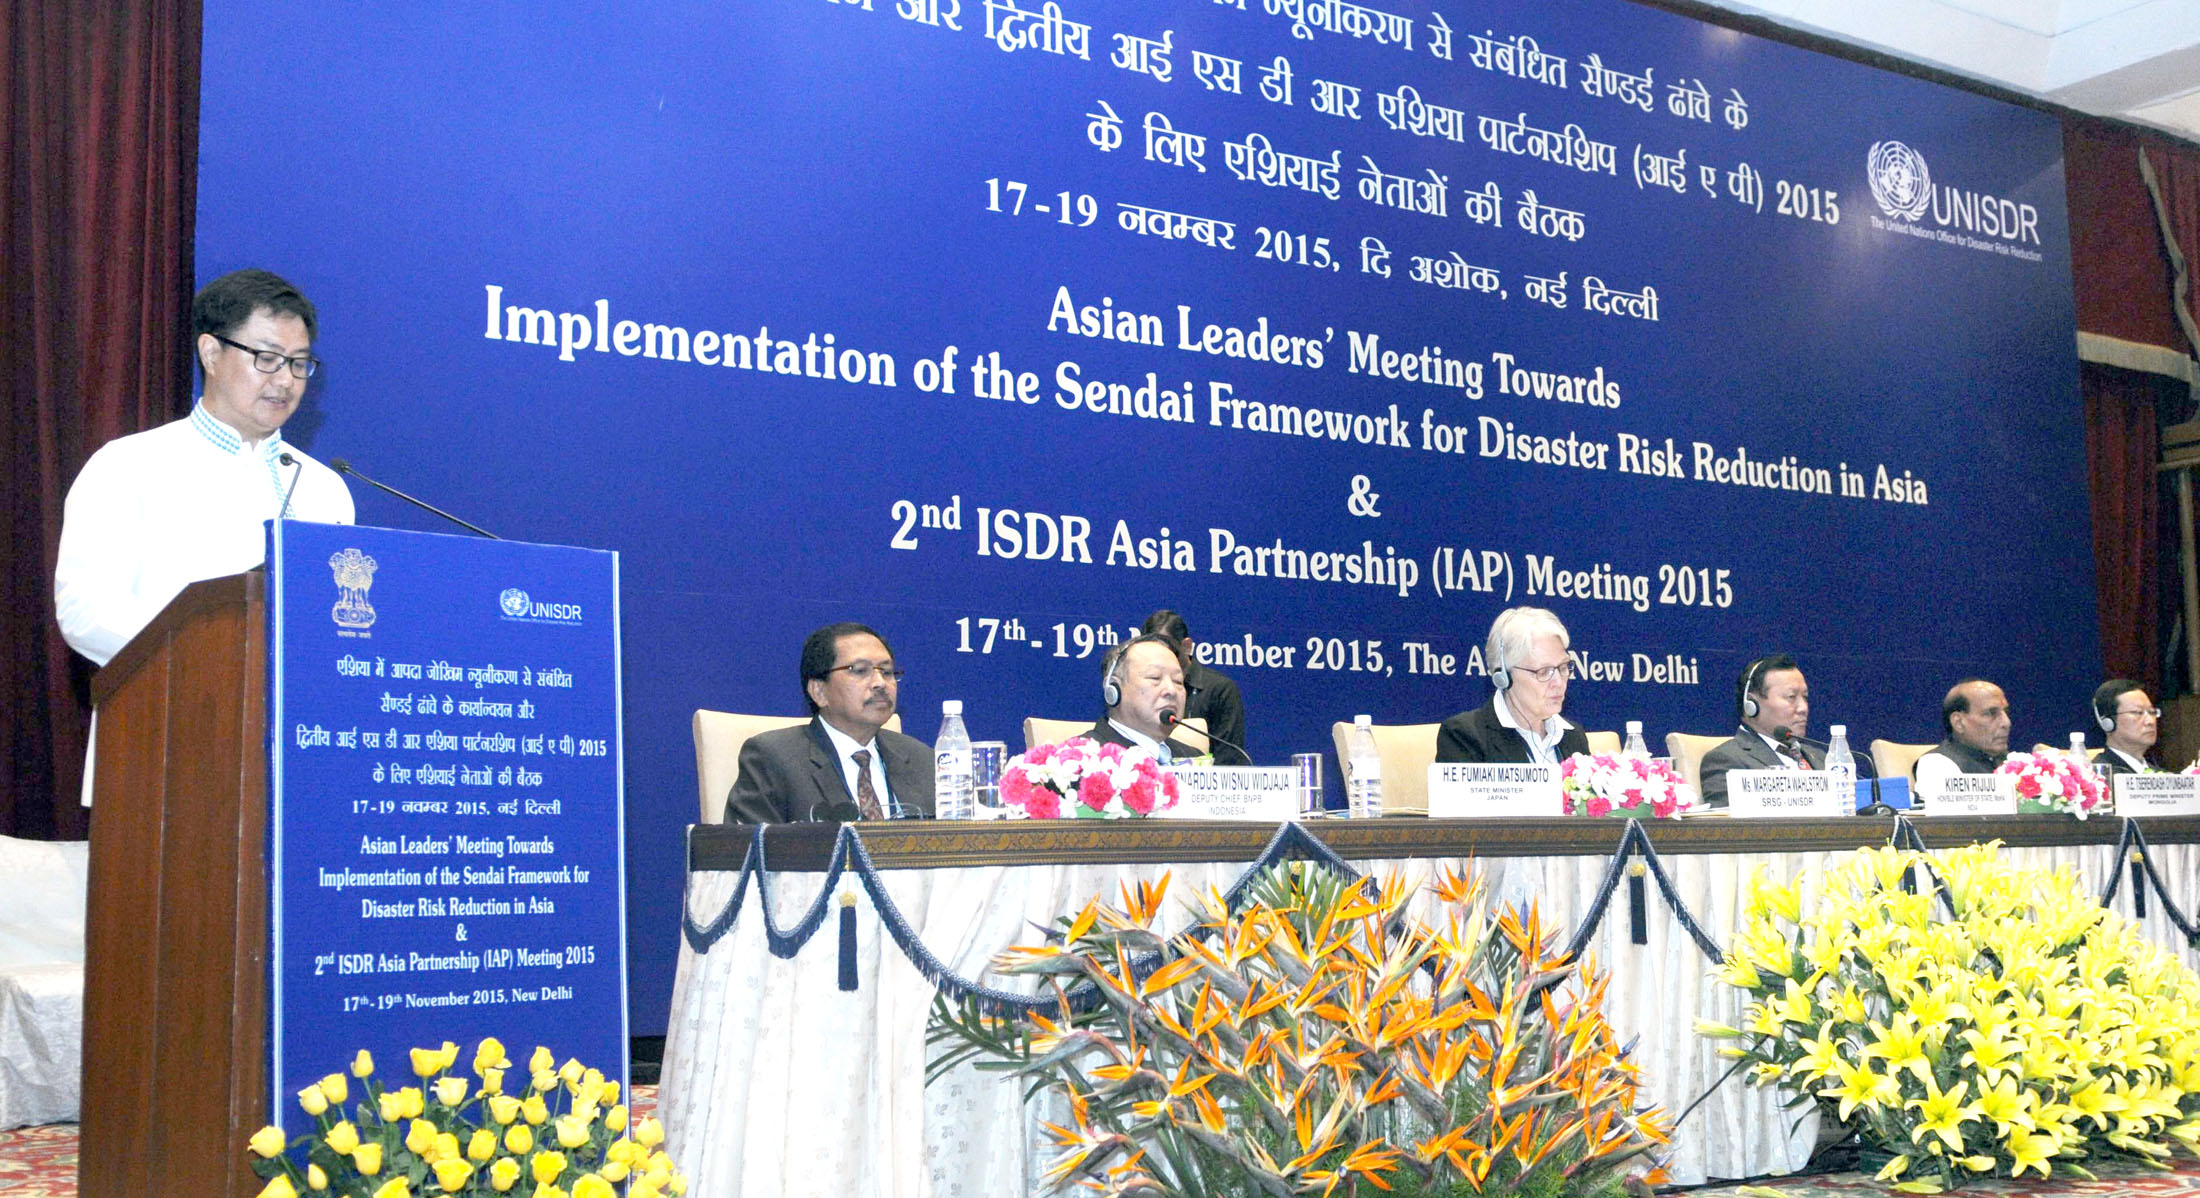 The Minister of State for Home Affairs, Shri Kiren Rijiju addressing the Inaugural Session of the Asian Leaders’ Meeting towards Implementation of the Sendai Framework, in New Delhi on November 17, 2015. The Union Home Minister, Shri Rajnath Singh and other dignitaries are also seen.